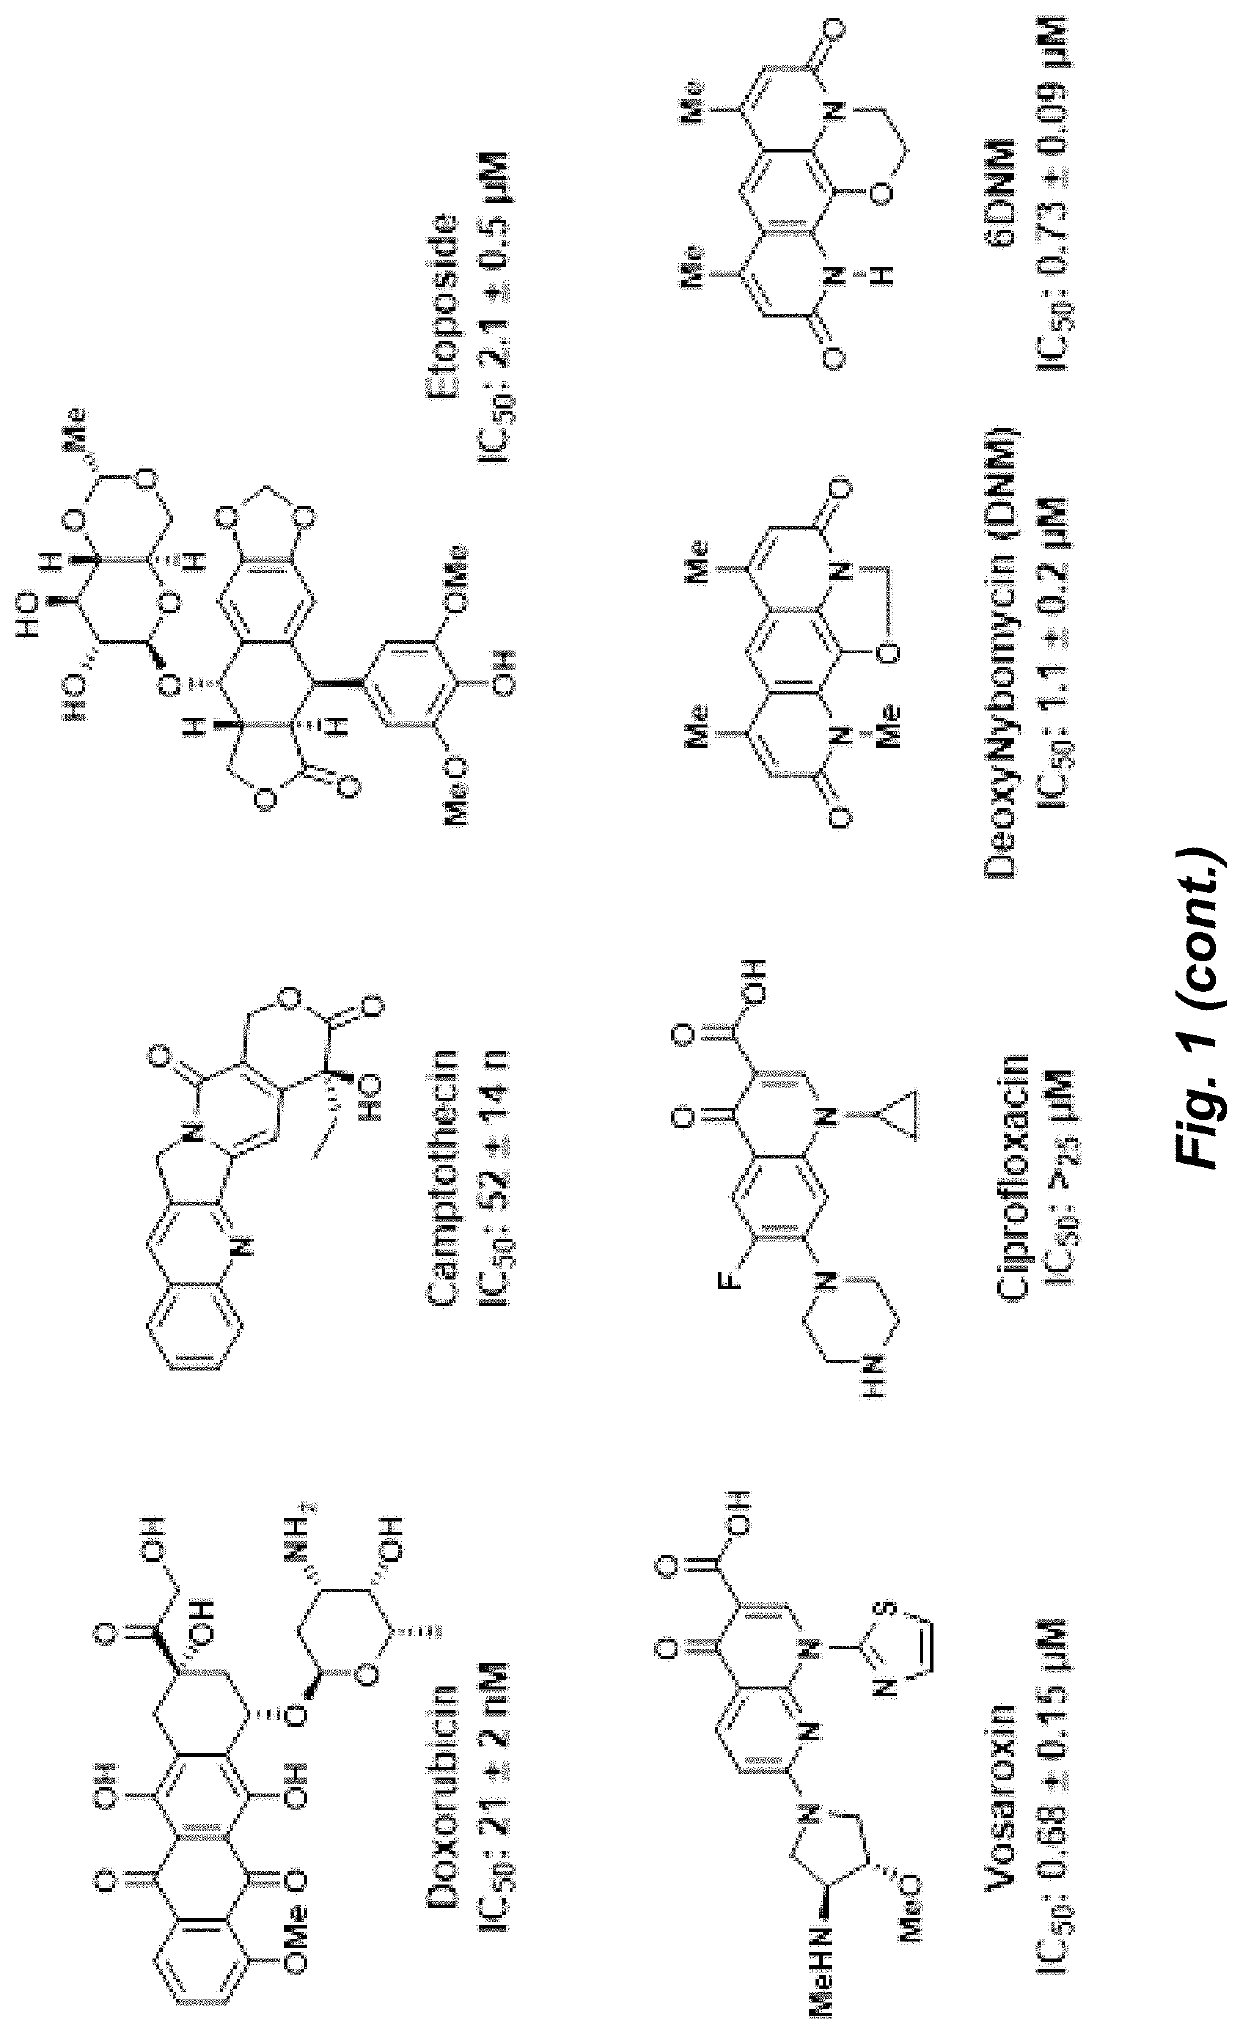 Topoisomerase inhibitors with antibacterial and anticancer activity